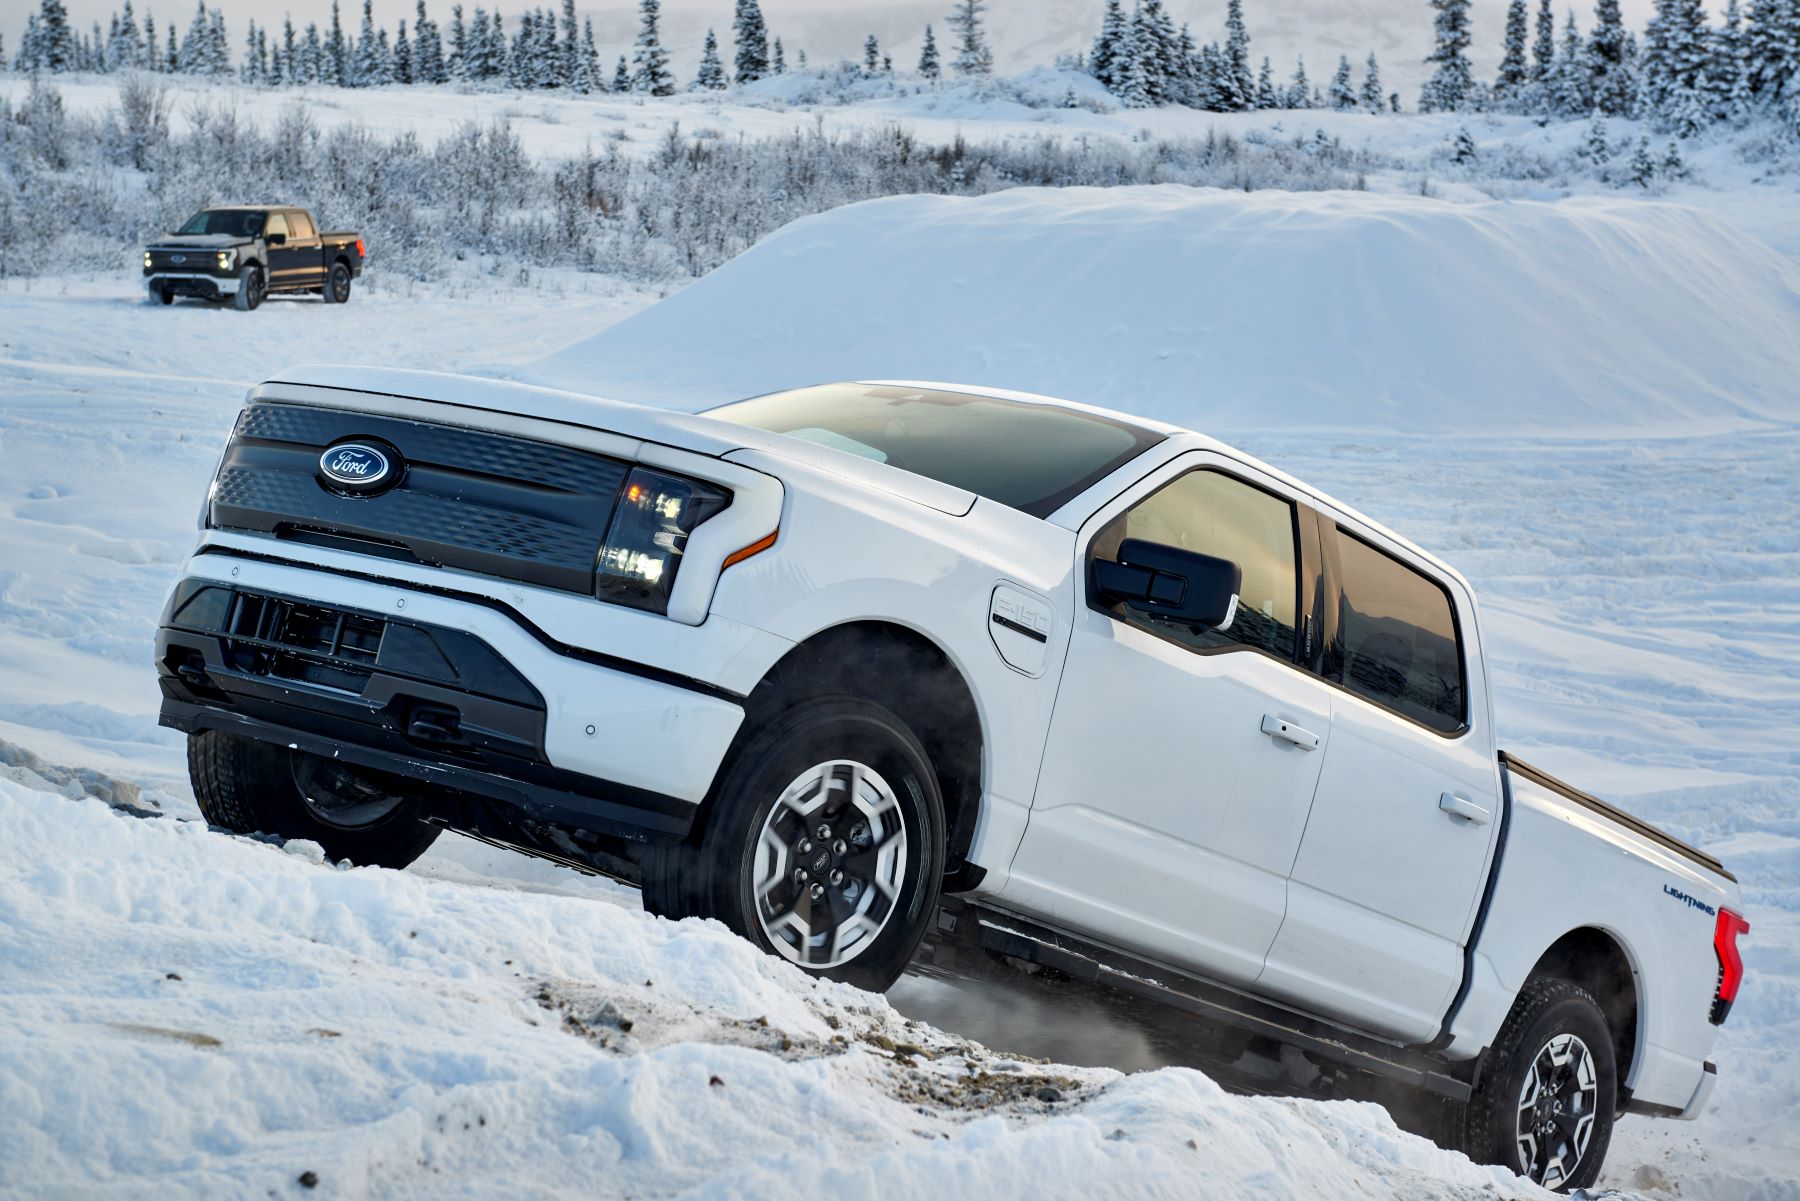 The 2022 Ford F-150 Lightning testing performance in the snow in Alaska